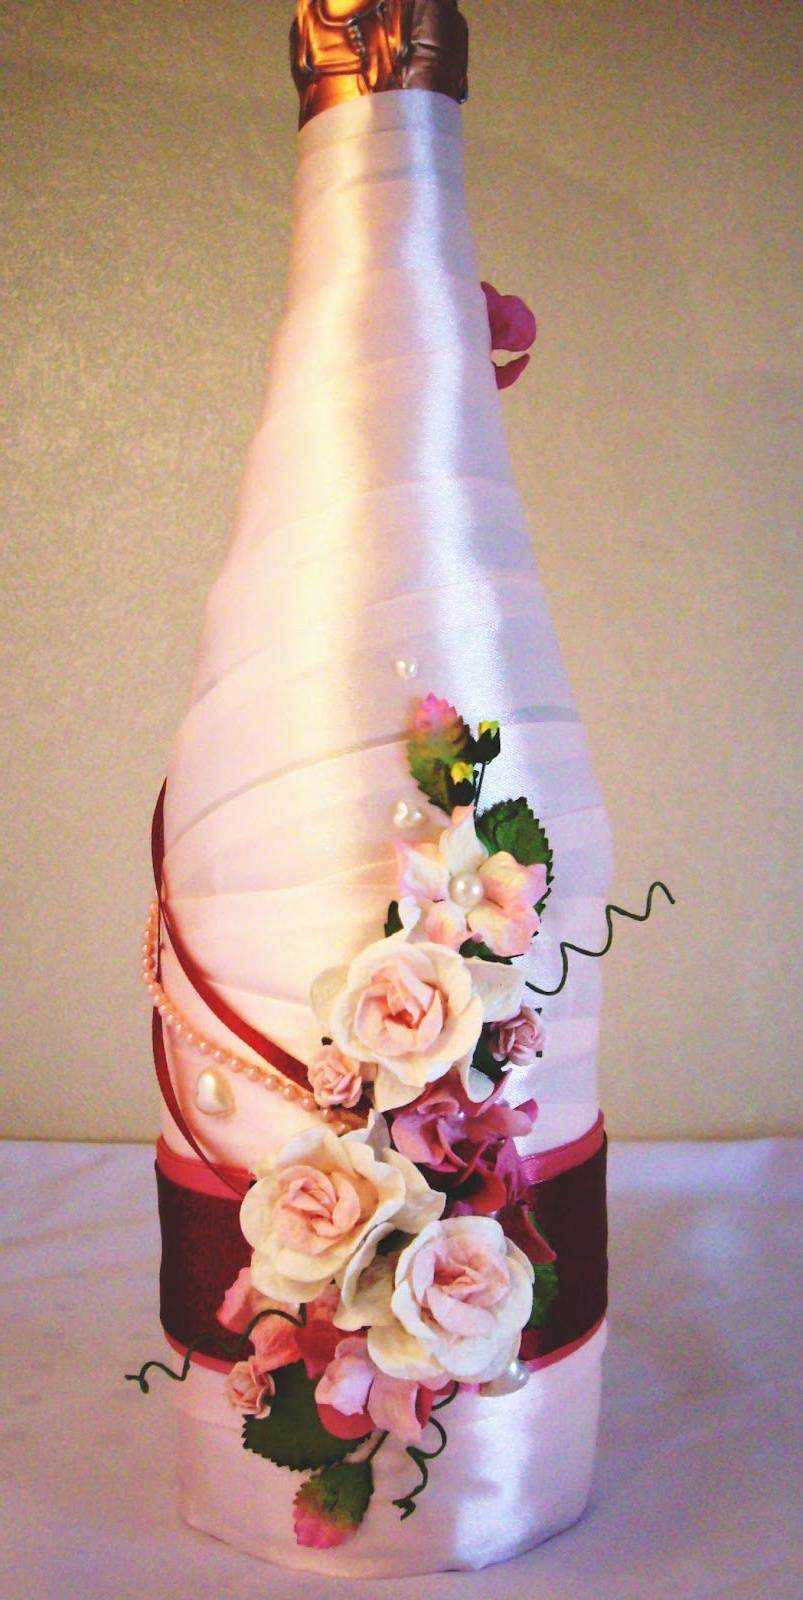 beautiful decoration of champagne bottles with colorful ribbons